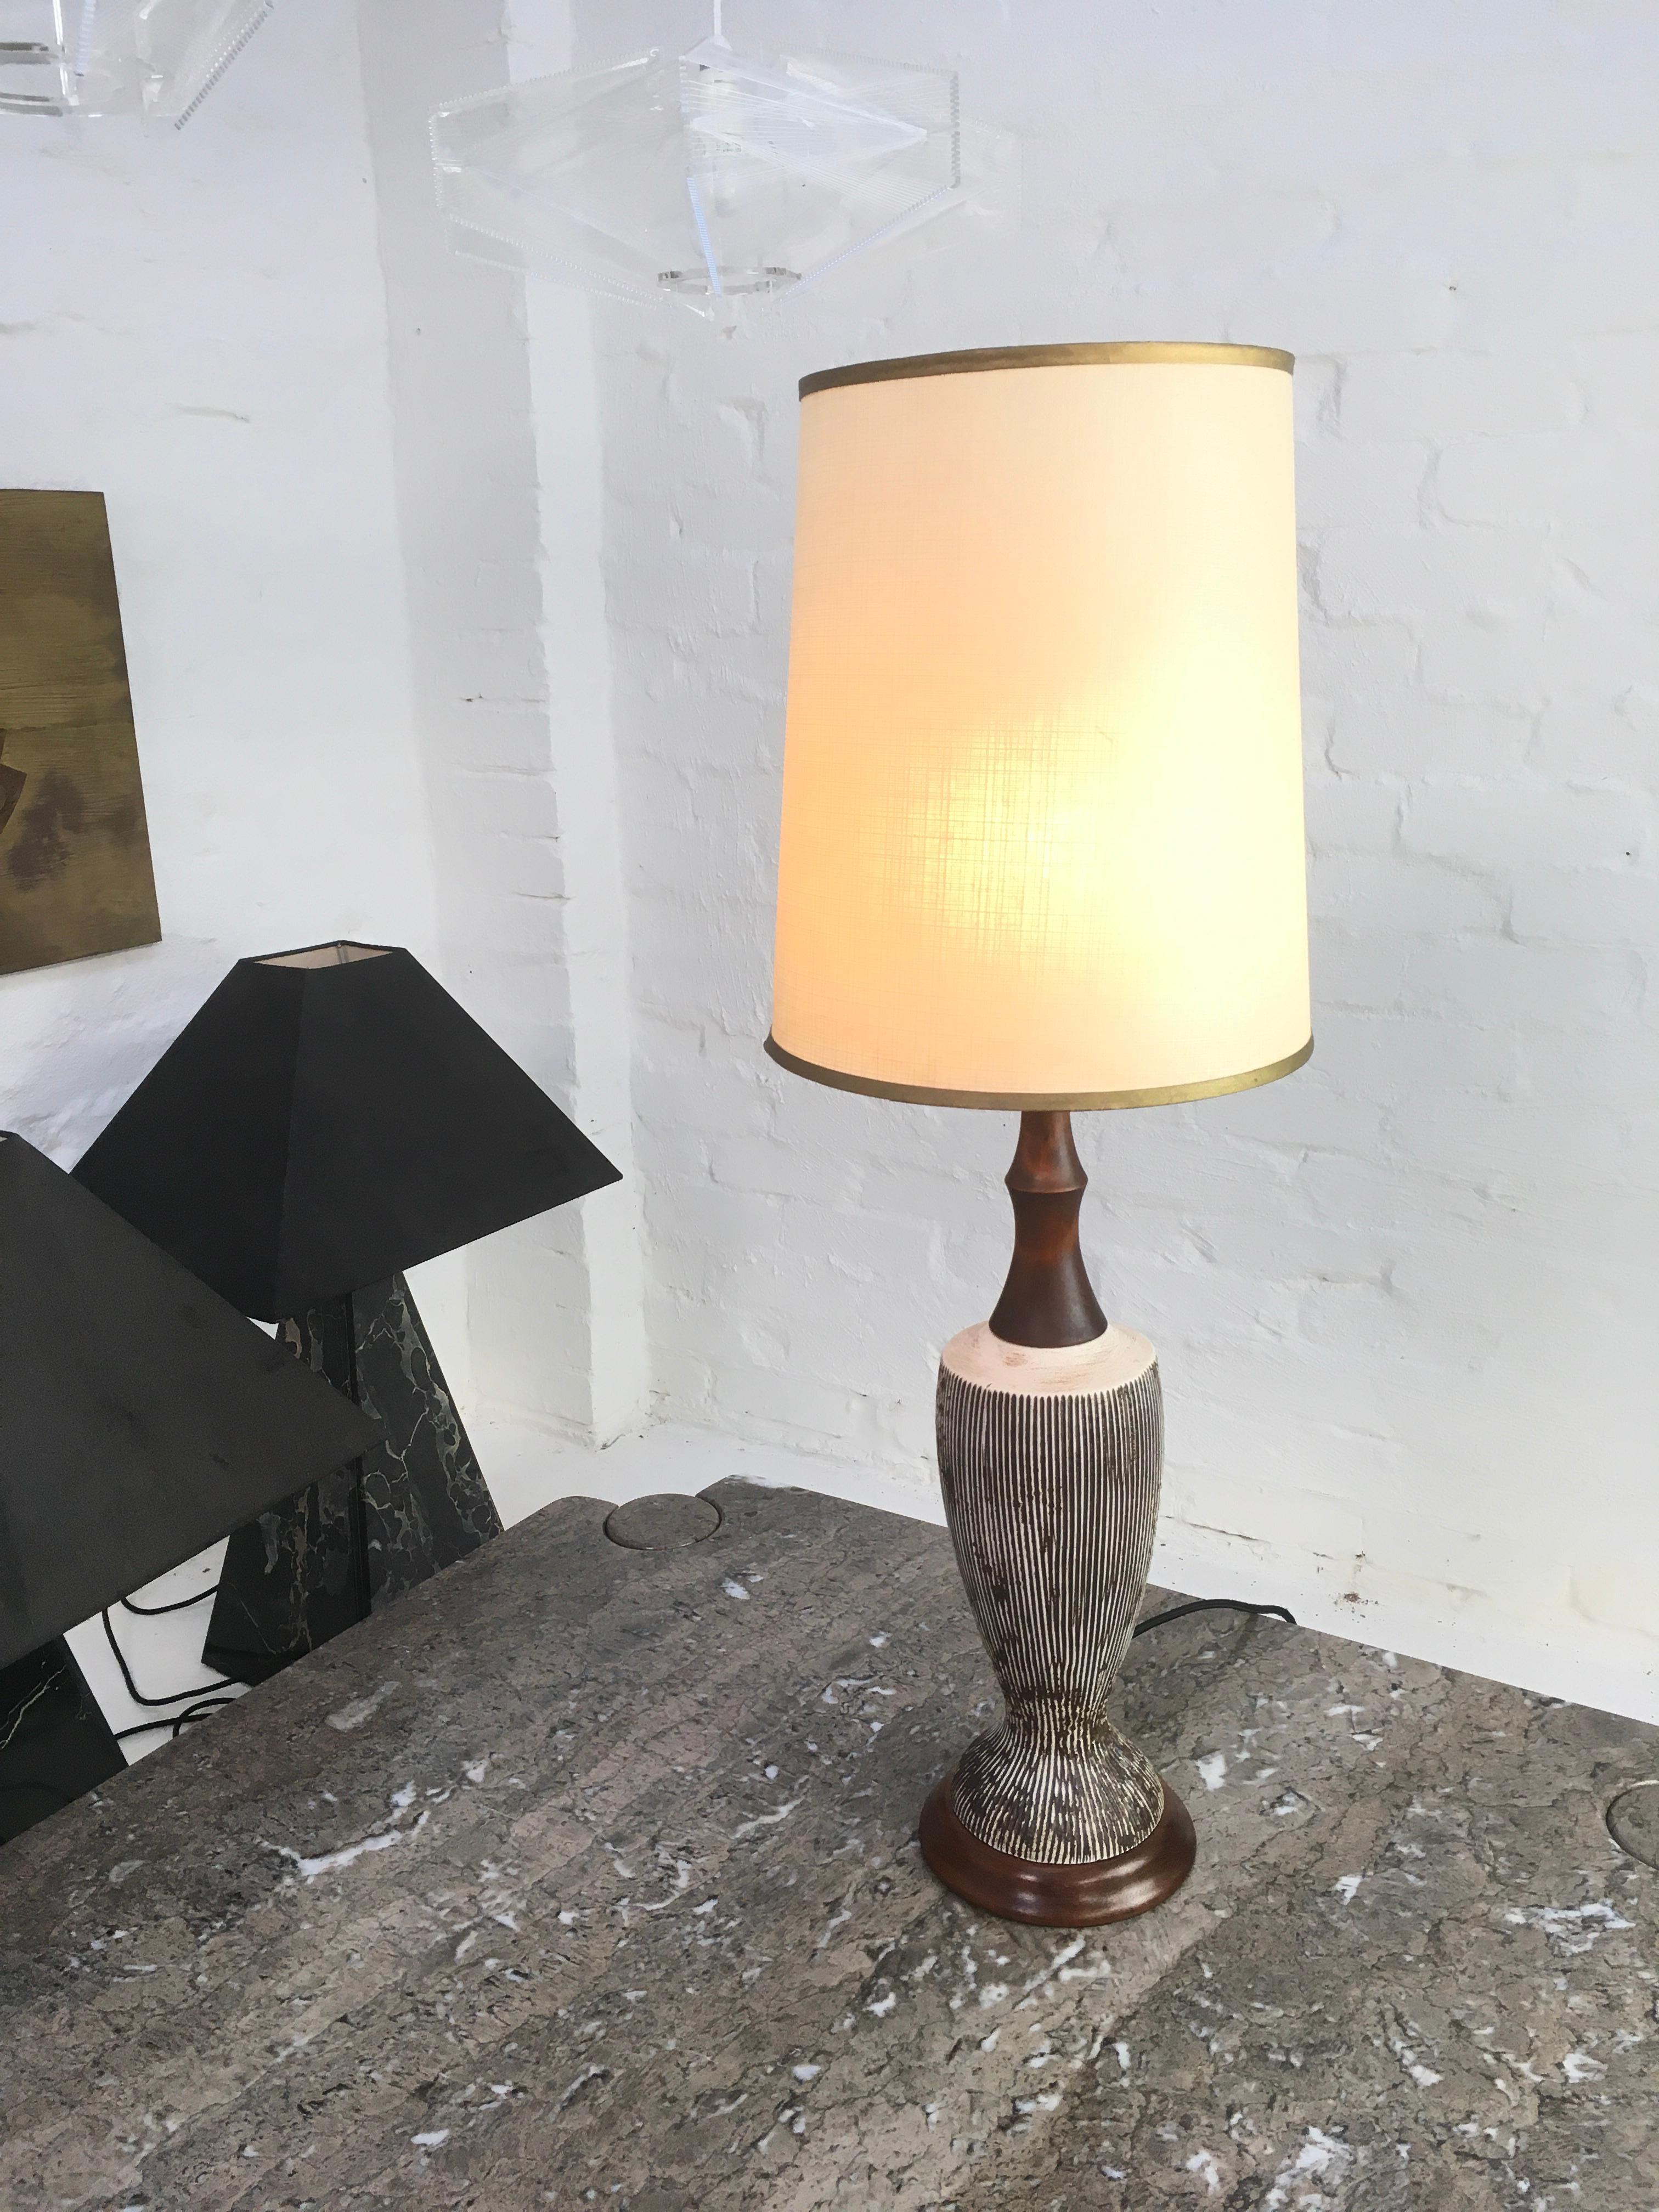 An Ellis Pottery ceramic lamp with Australian blackwood base and a turned myrtle stem stained to a deep walnut finish.

We love these ceramic and timber Ellis lamps for their Classic pared-down midcentury aesthetic. This one is in excellent